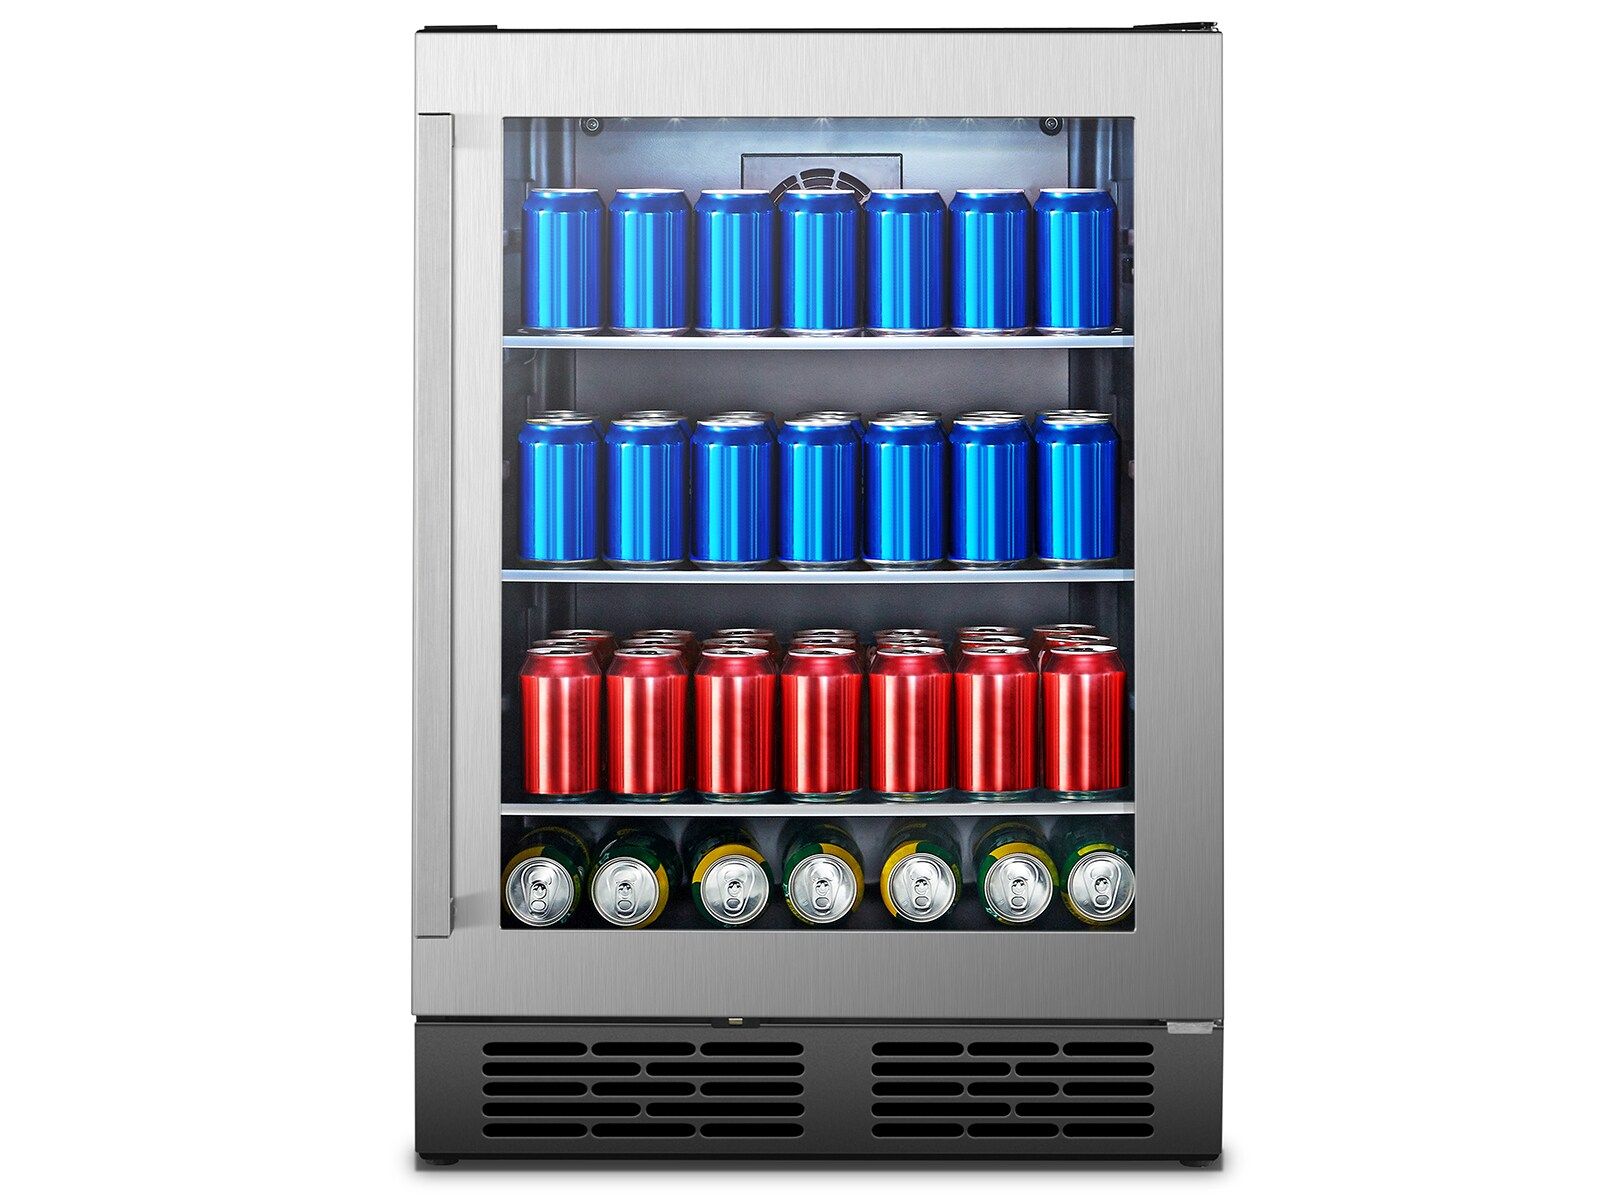 Hisense 23.43-in W 140-Can Capacity Stainless Steel Freestanding Beverage Refrigerator with Glass... | Lowe's